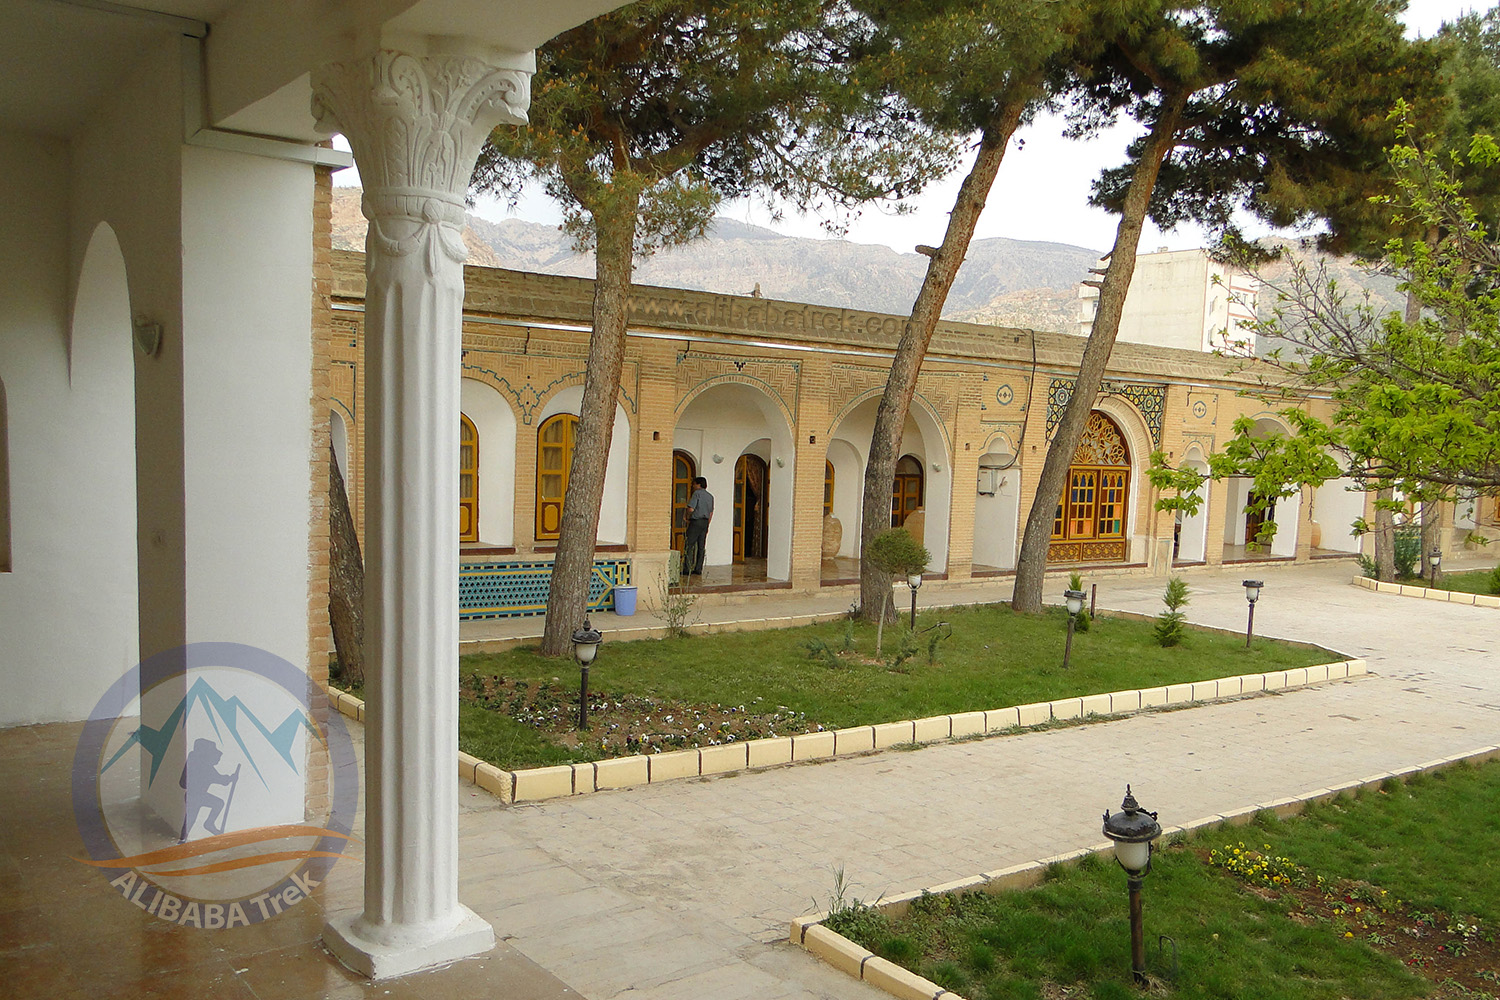 The Vali Castle of Ilam is one of the important monuments of Qajar period in Ilam City